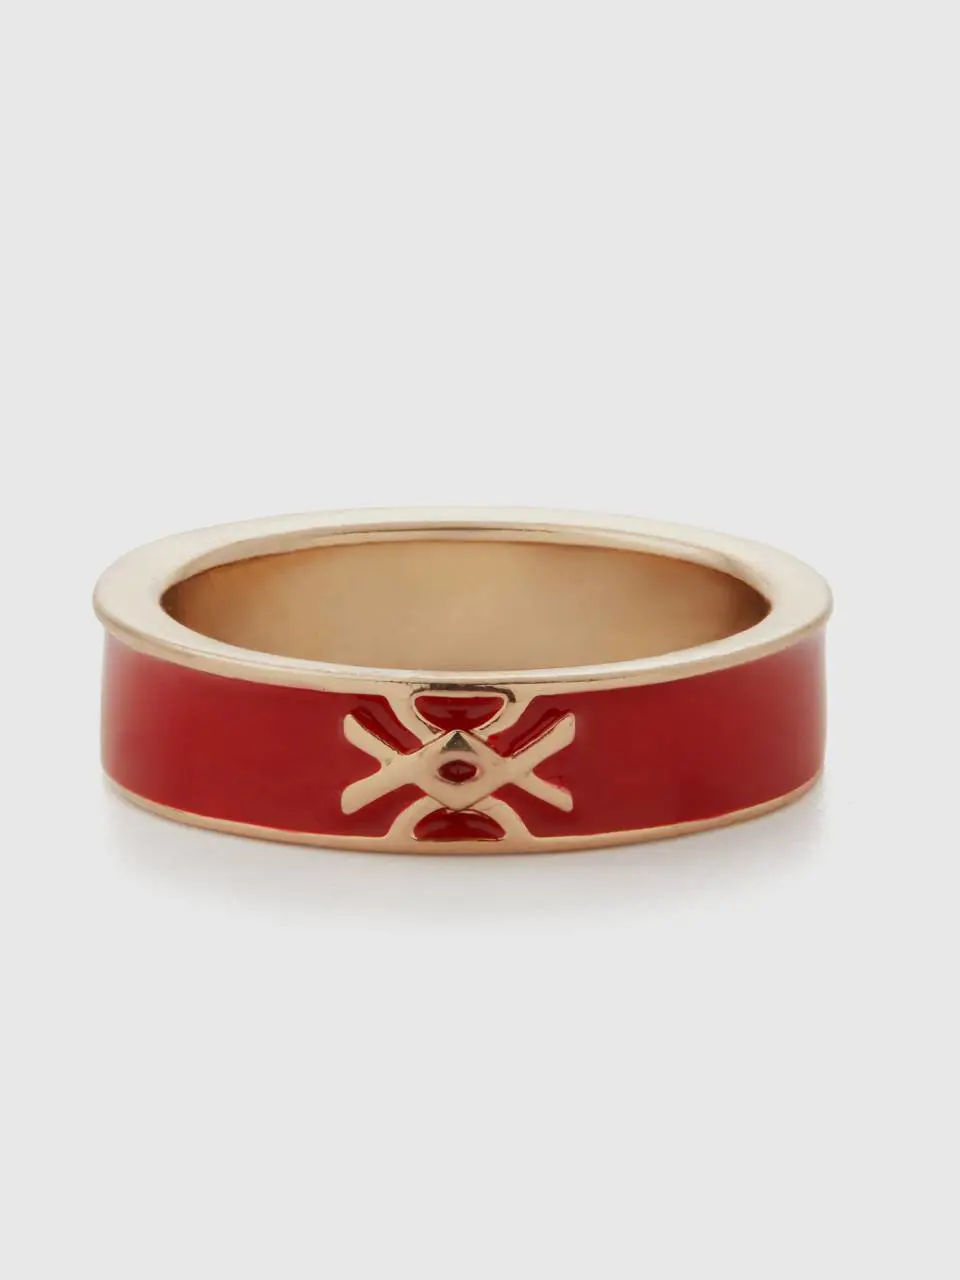 Benetton coral red band ring with logo. 1